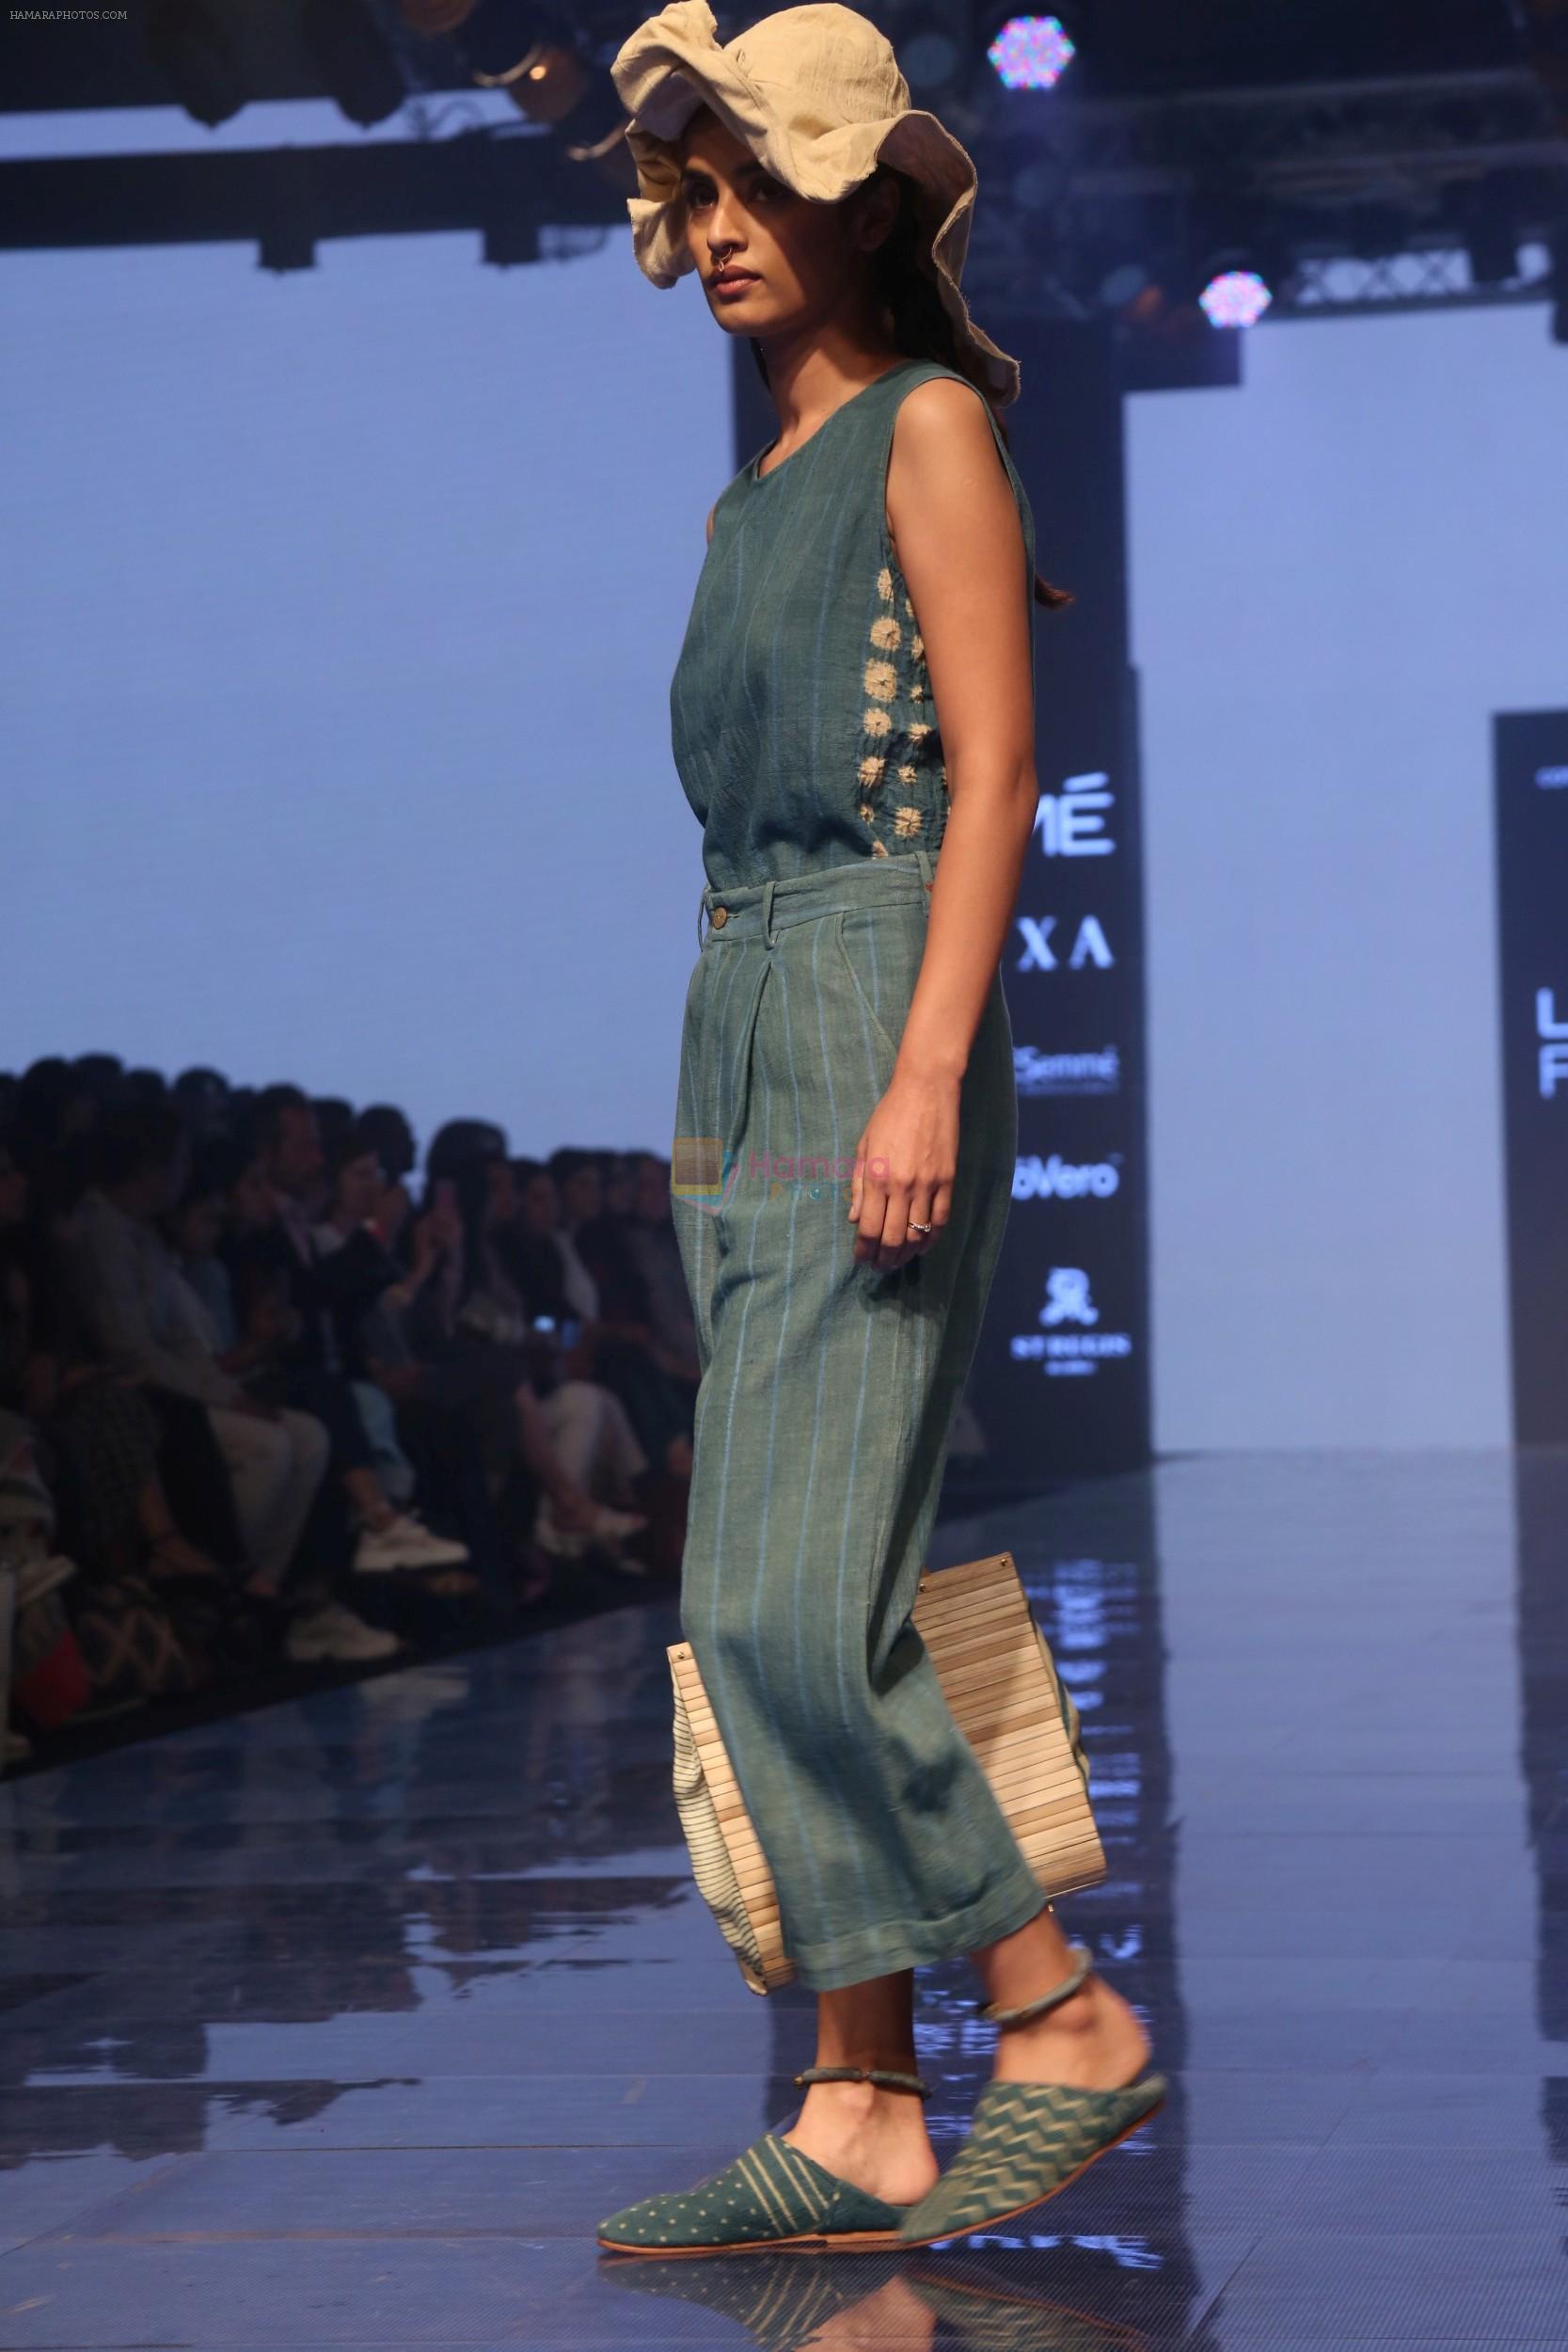 Model at Cotton Champions Farmers By C & A Foundation with Eleven Eleven Runway on 22nd Aug 2019